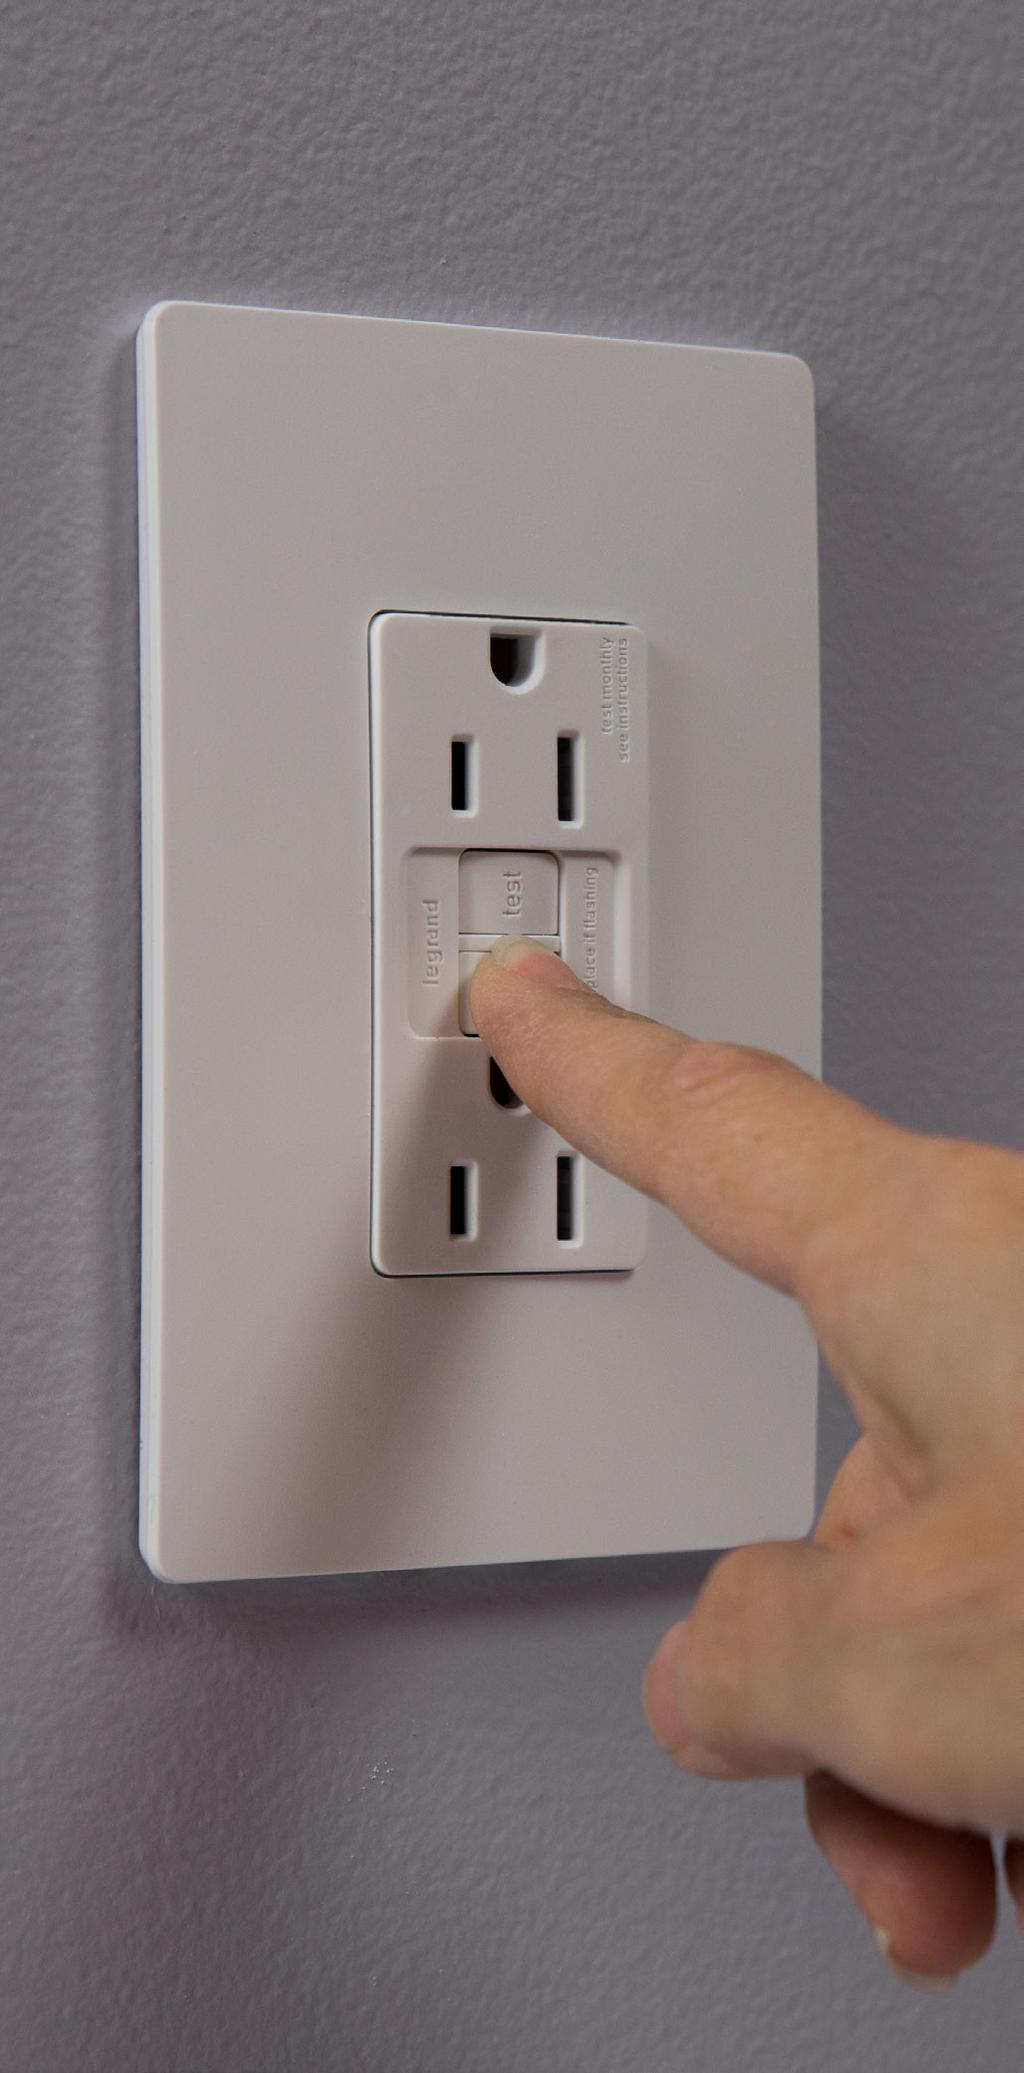 Solution 2: GFCI Receptacle with AFCI Breaker On kitchen and laundry room circuits, GFCI receptacles can be installed along with an AFCI circuit breaker, to provide easy reset available at the point